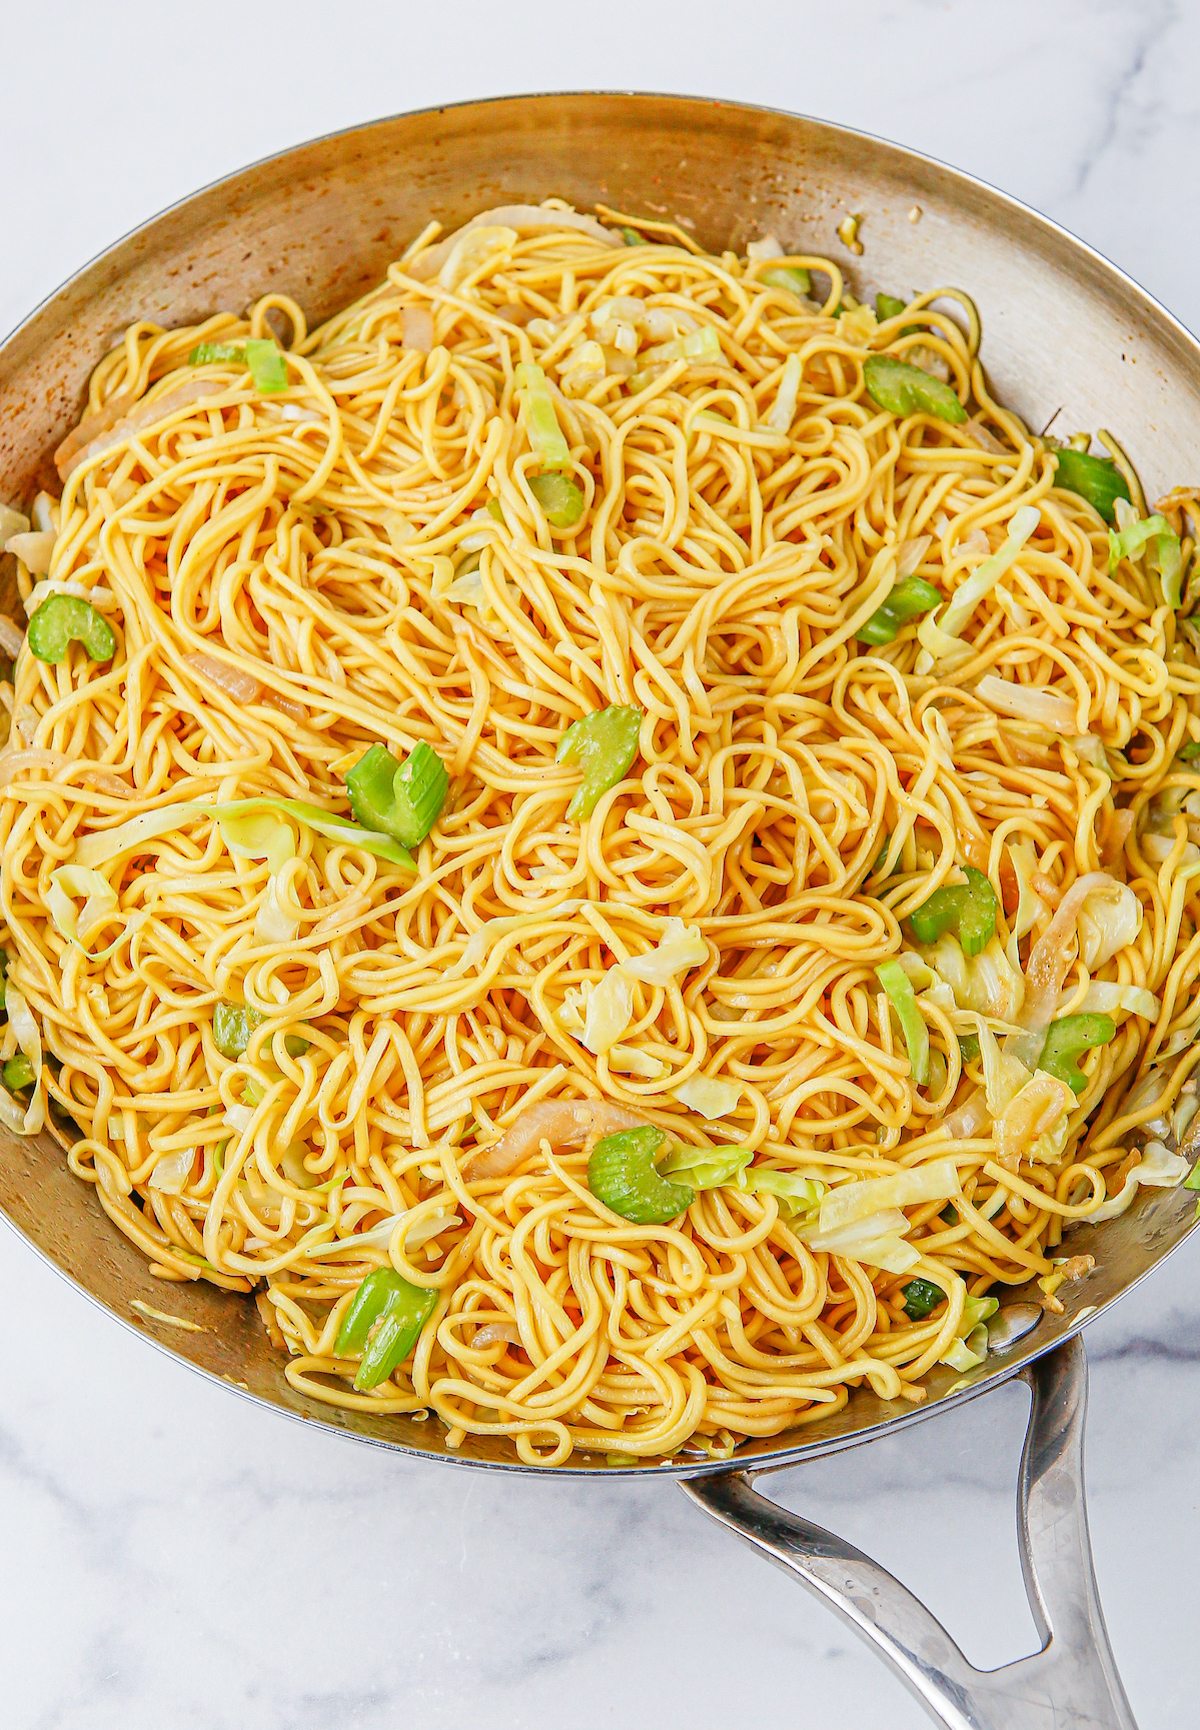 A sautee pan filled with cooked chow mein noodles garnished with sliced green onion.